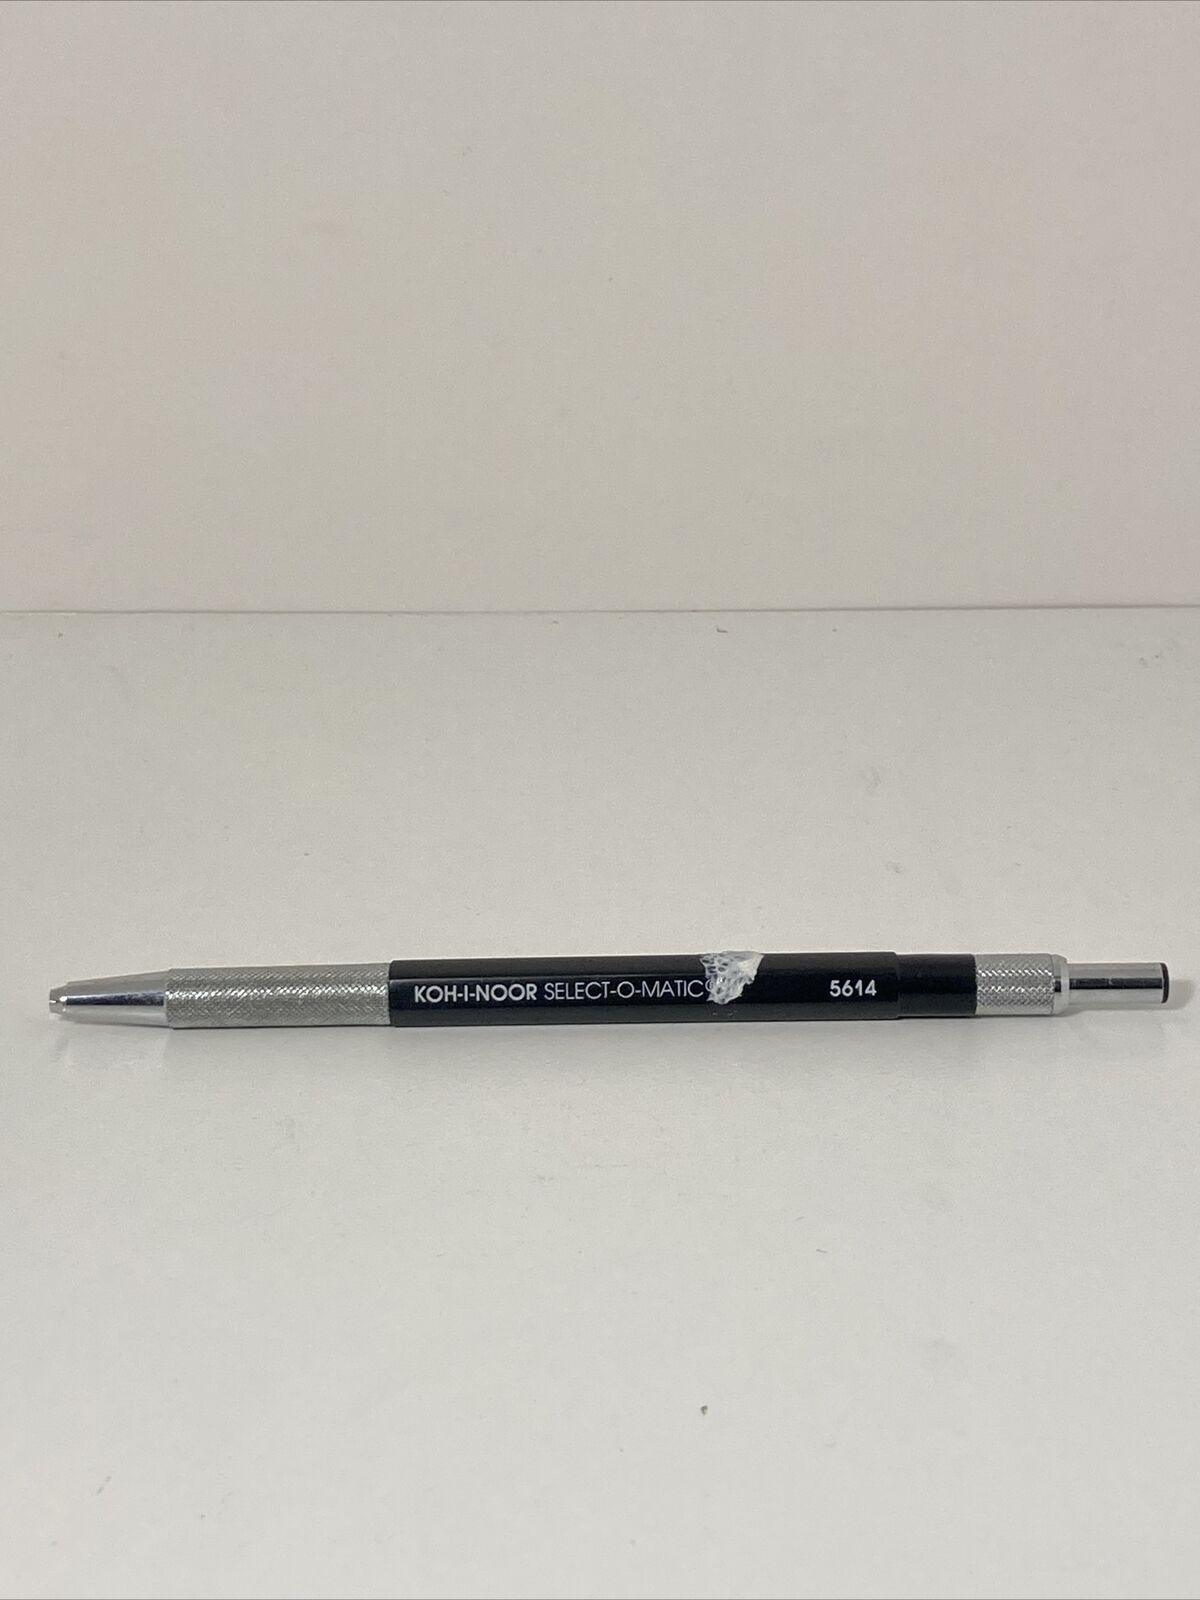 Rare Vintage Koh-I-Noor Select-O-Matic II 5614 Mechanical Pencil Made In Japan